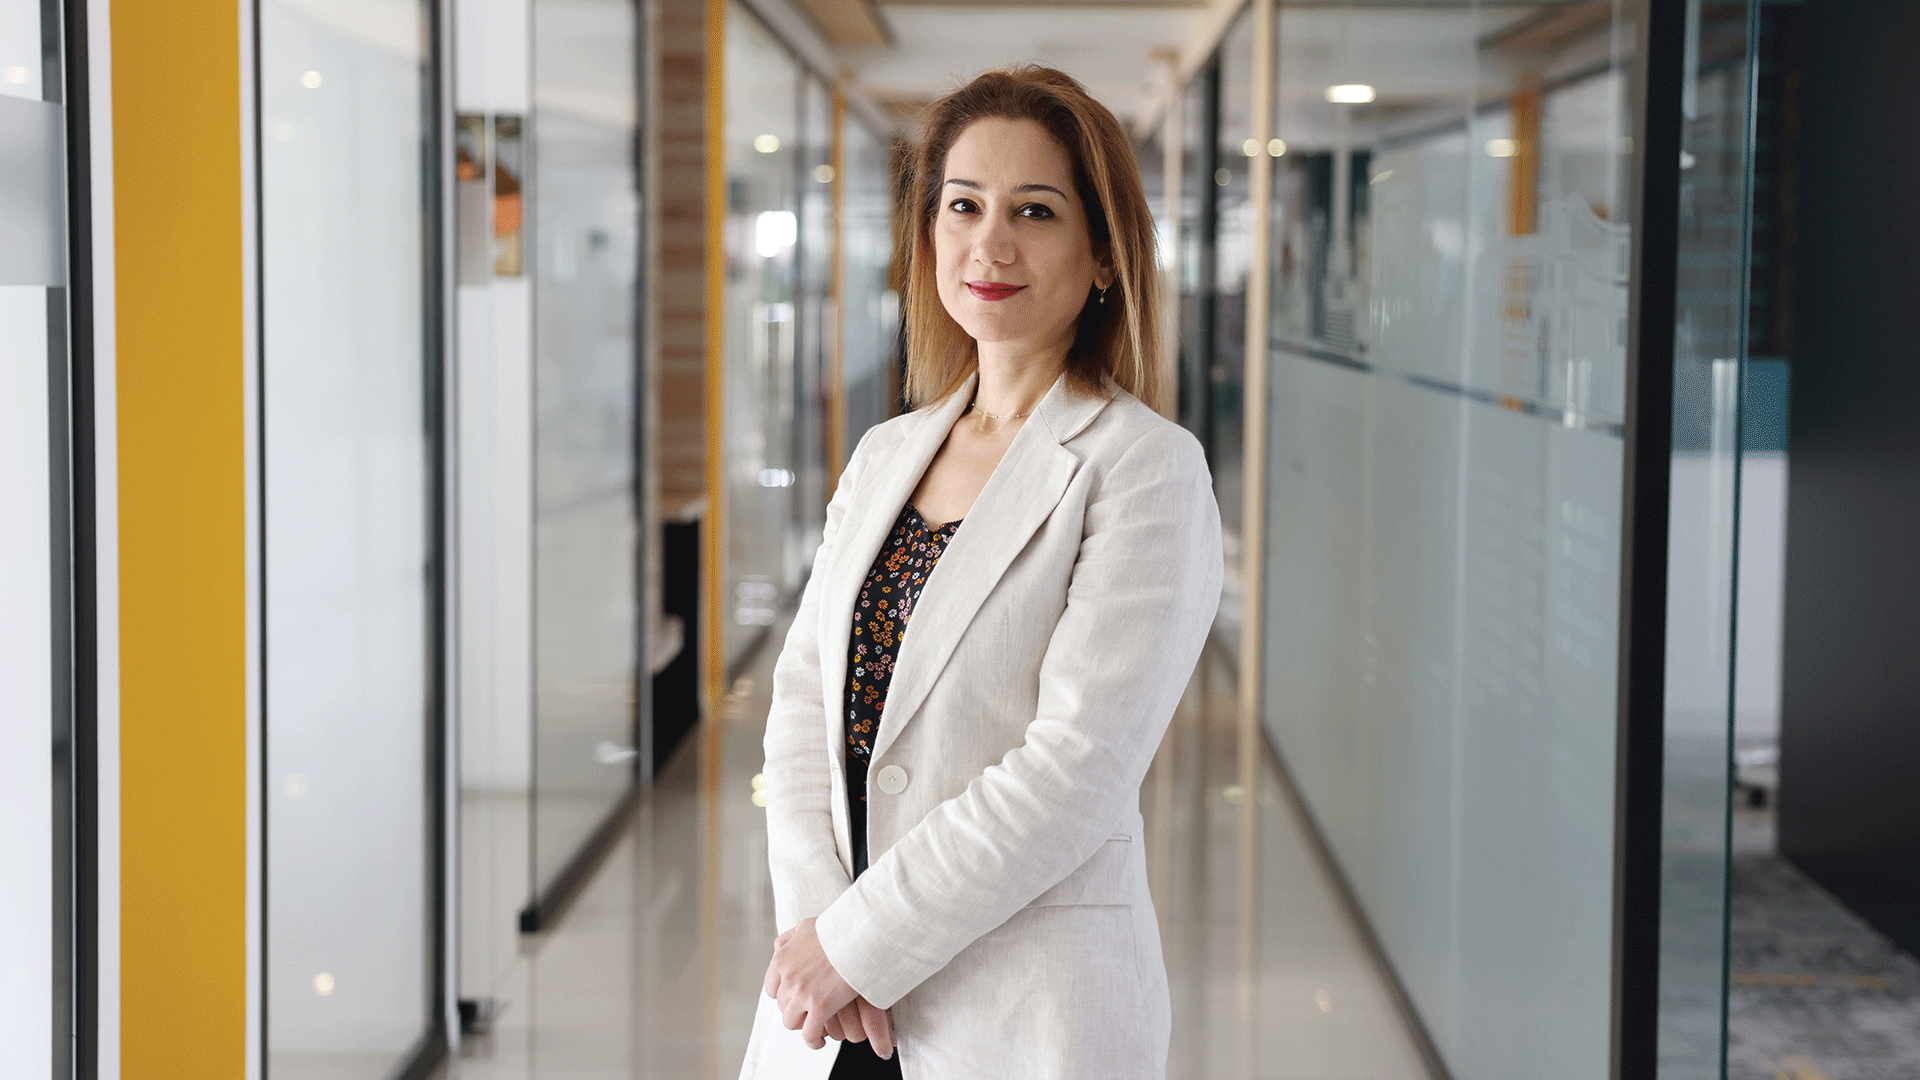 Anna Stepanyan, who started her first steps in IT as an administrative assistant in 2008, now holds the position of director at Synergy Armenia